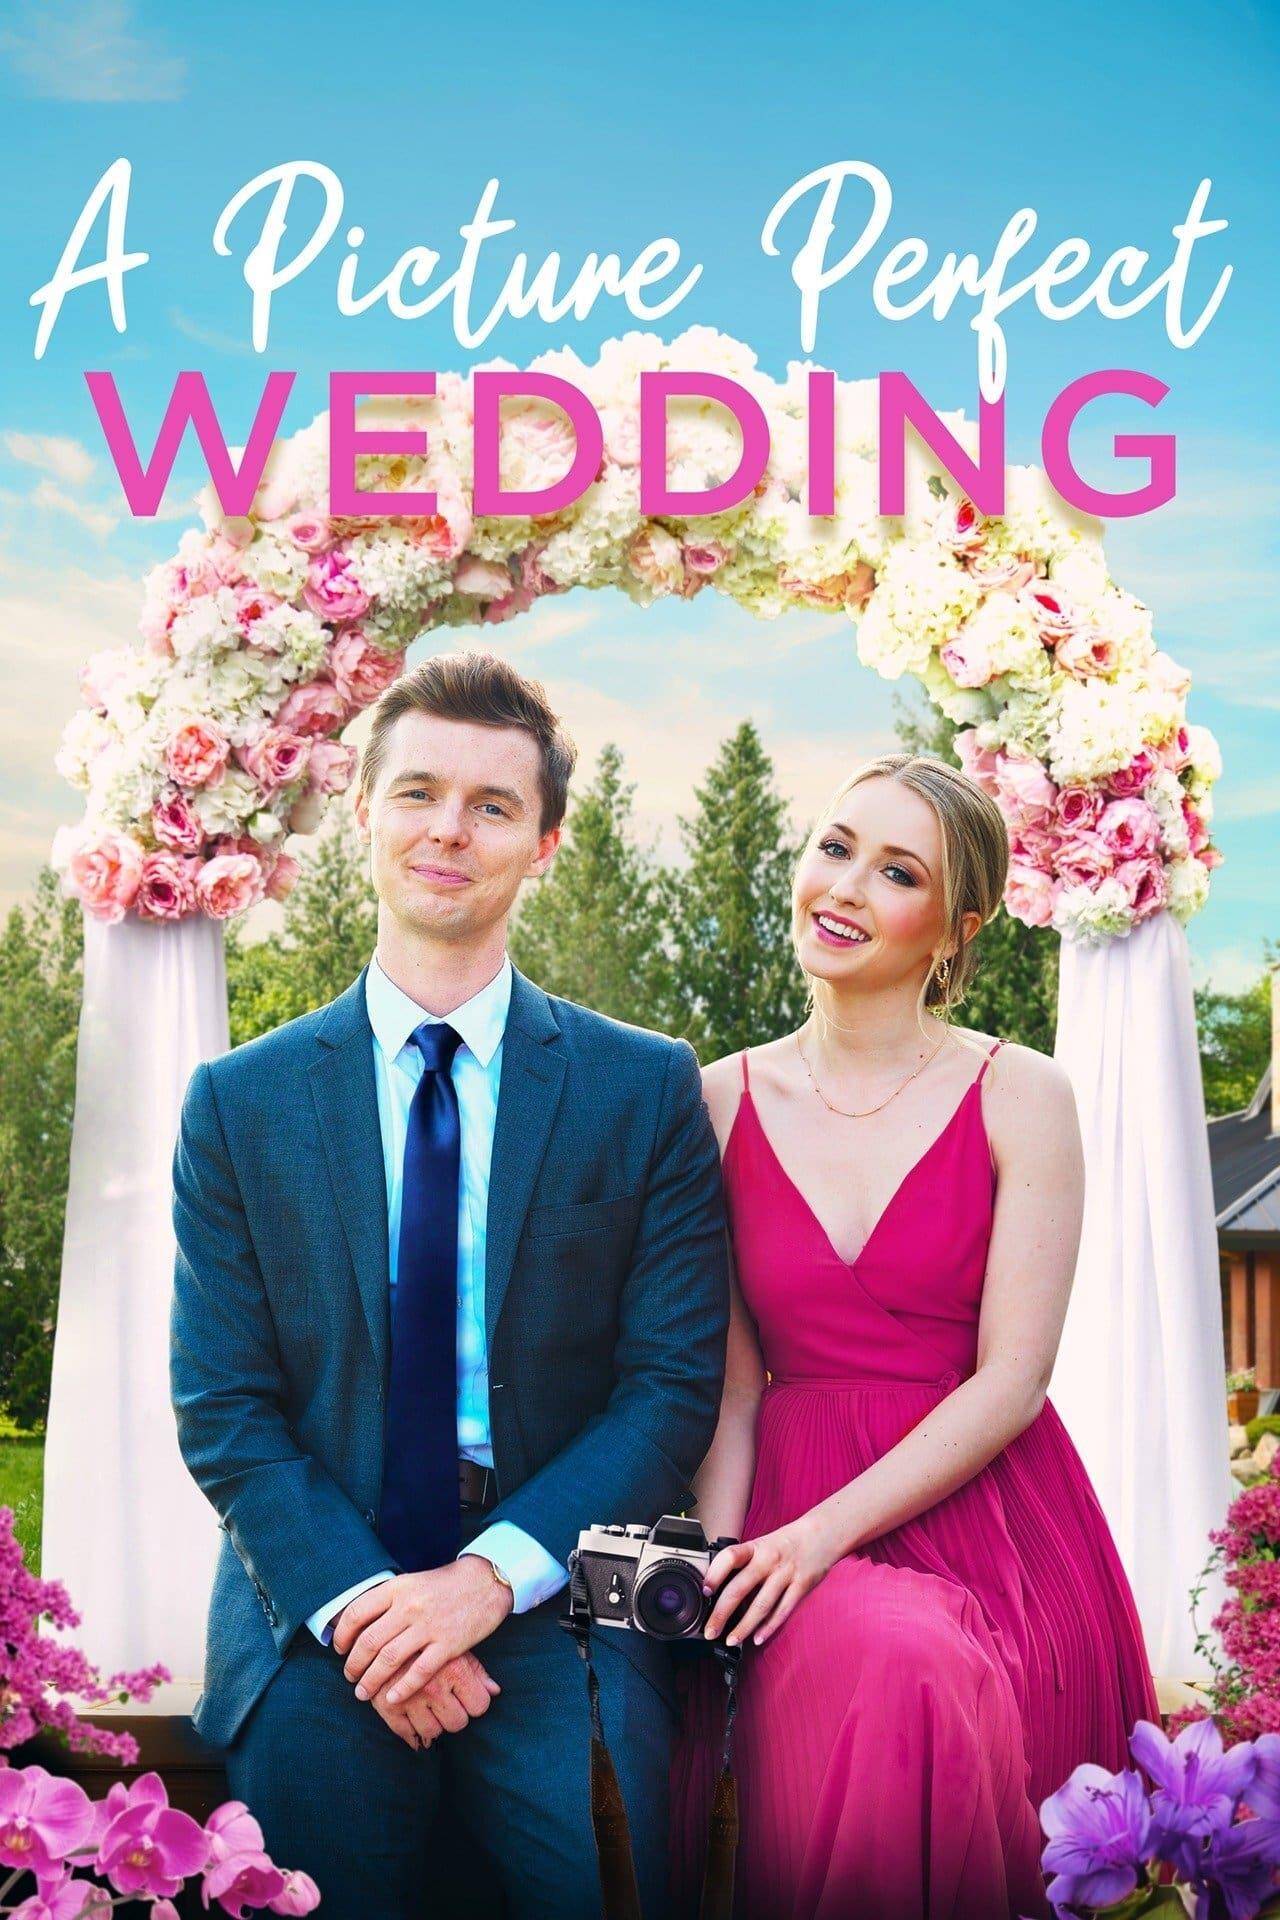 A Picture Perfect Wedding poster